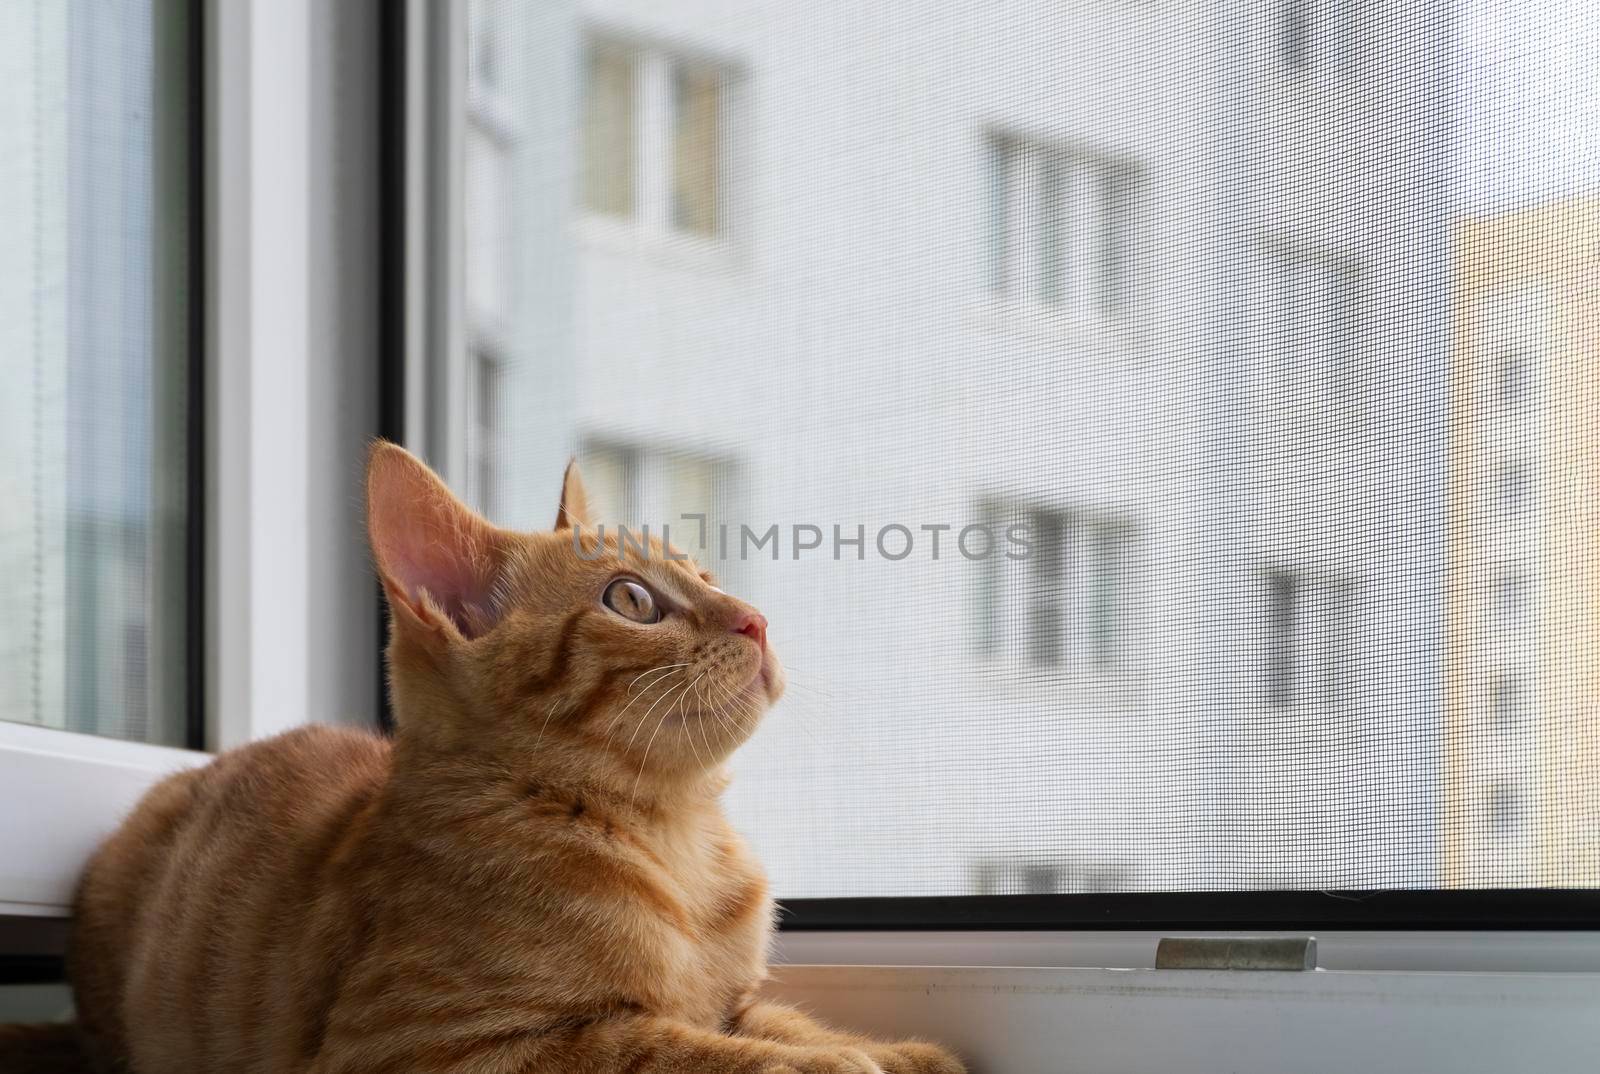 A small cute ginger tabby kitten sits on the window sill with a protective mosquito and anti-vandal anti-cat net and looks up. Pets. Selective focus.